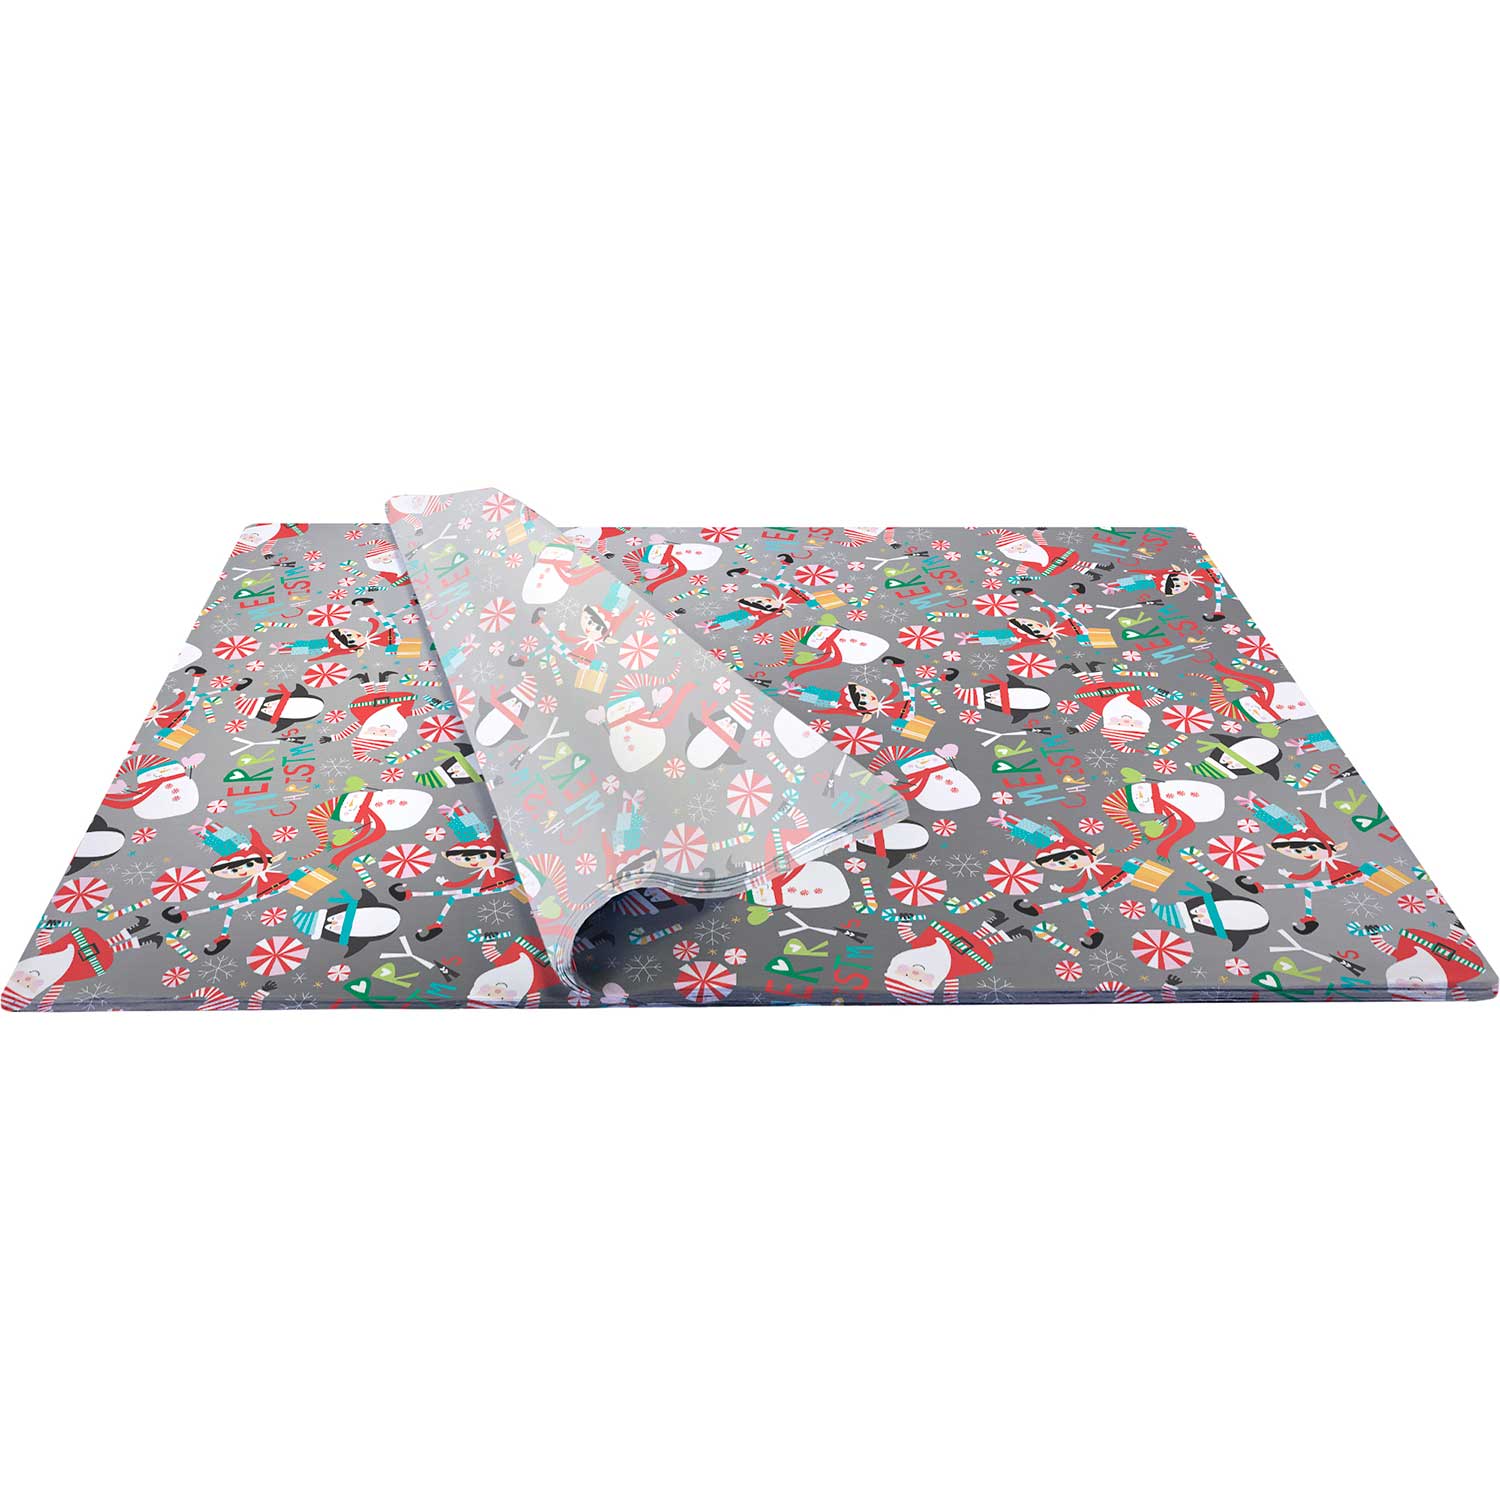 String of Lights 20 x 30 Christmas Gift Tissue Paper | Present Paper, 48 Folded Sheets